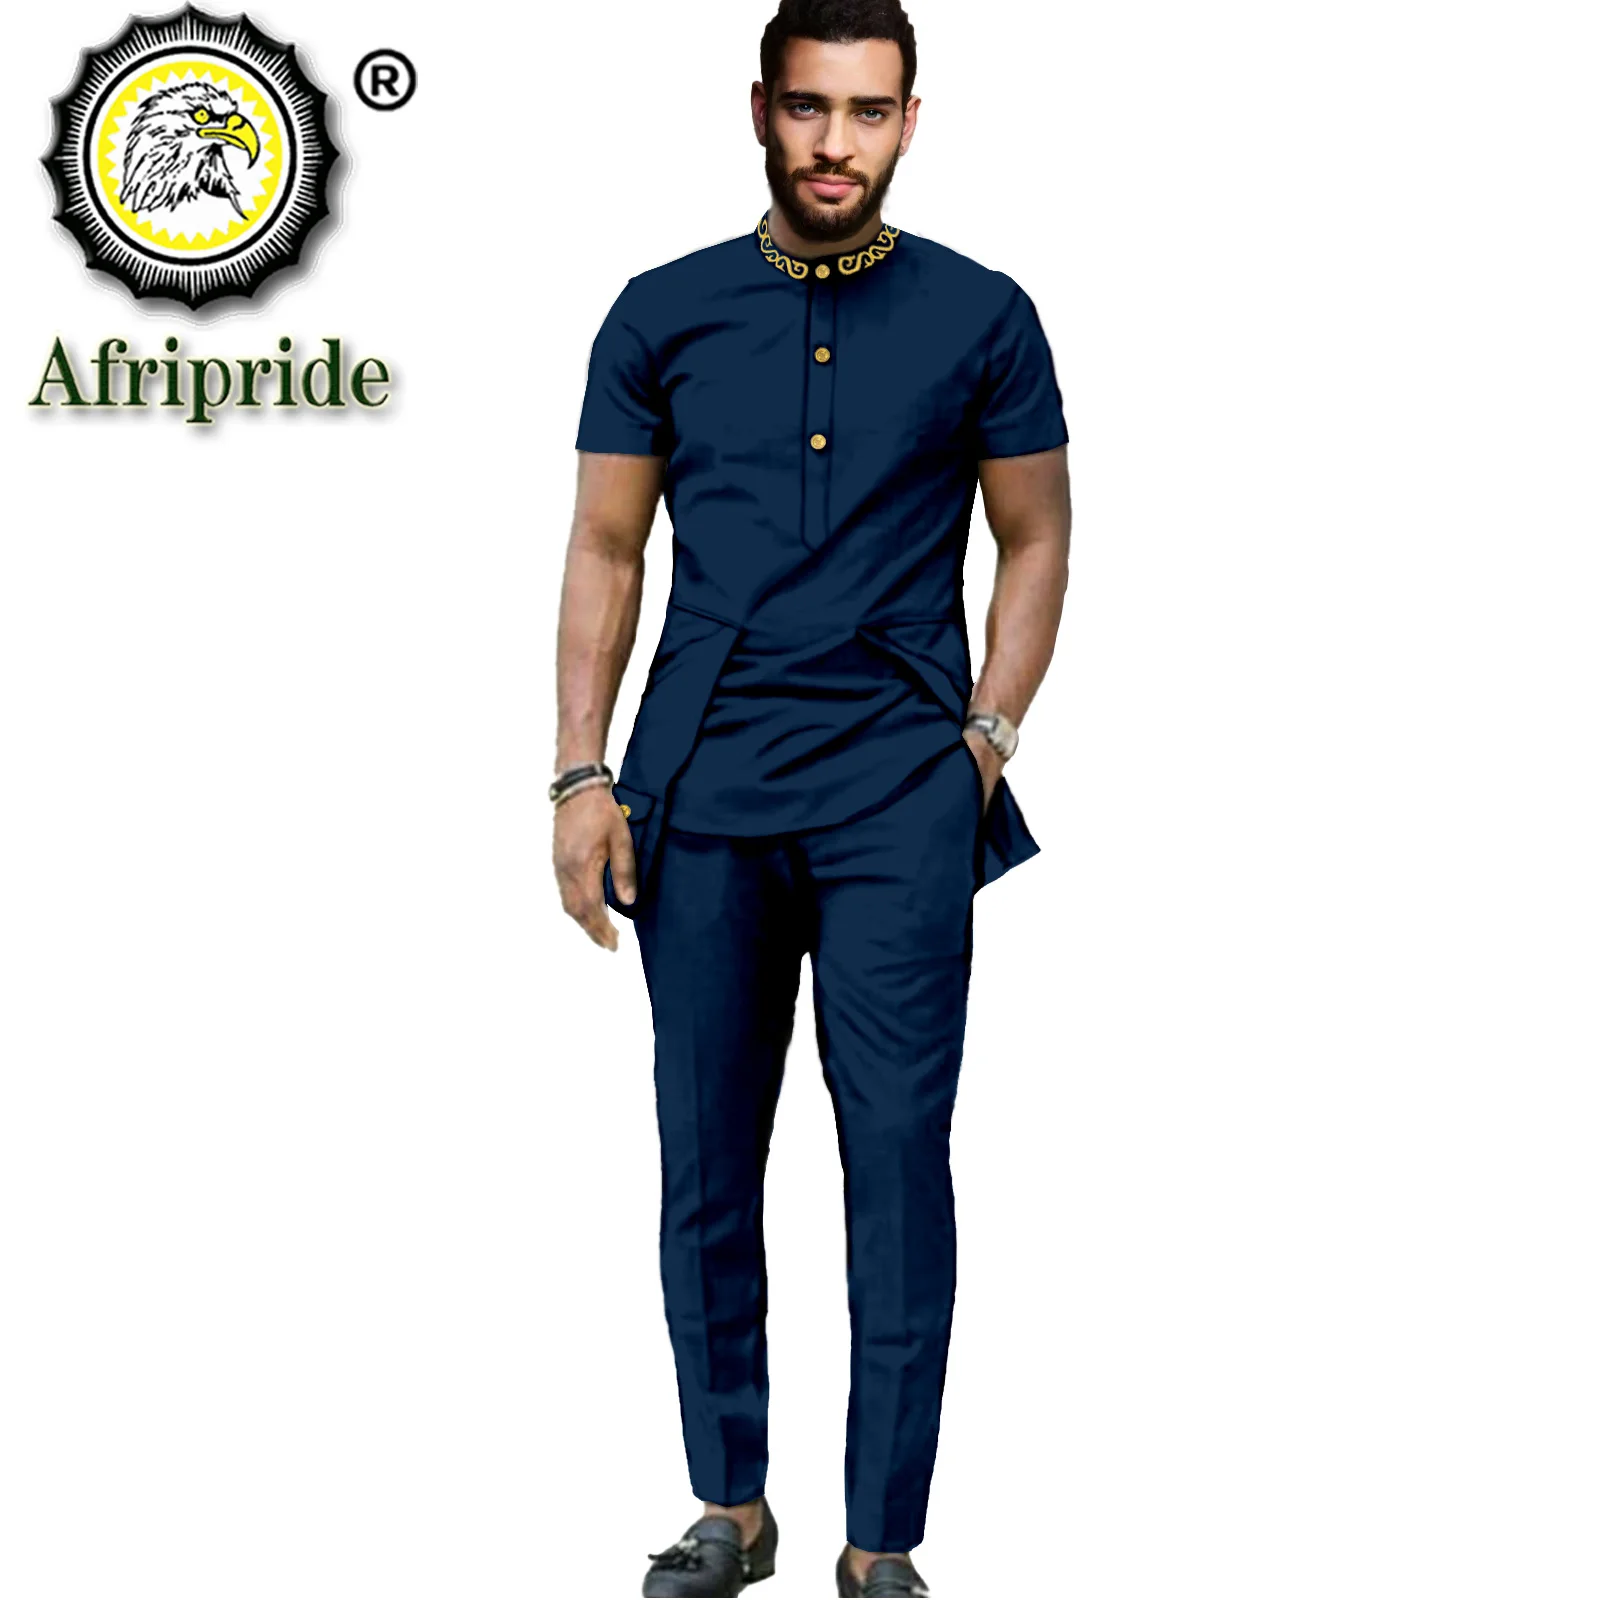 African Clothes for Men Embroidery Short Sleeve Shirt and Pant 2 Piece Set Dashiki Outfit Plus Size Tracksuit Blouse S2116011 african suits for men short sleeve shirts and shorts 2 piece set plus size casual tracksuit dashiki attire blouse a2316089